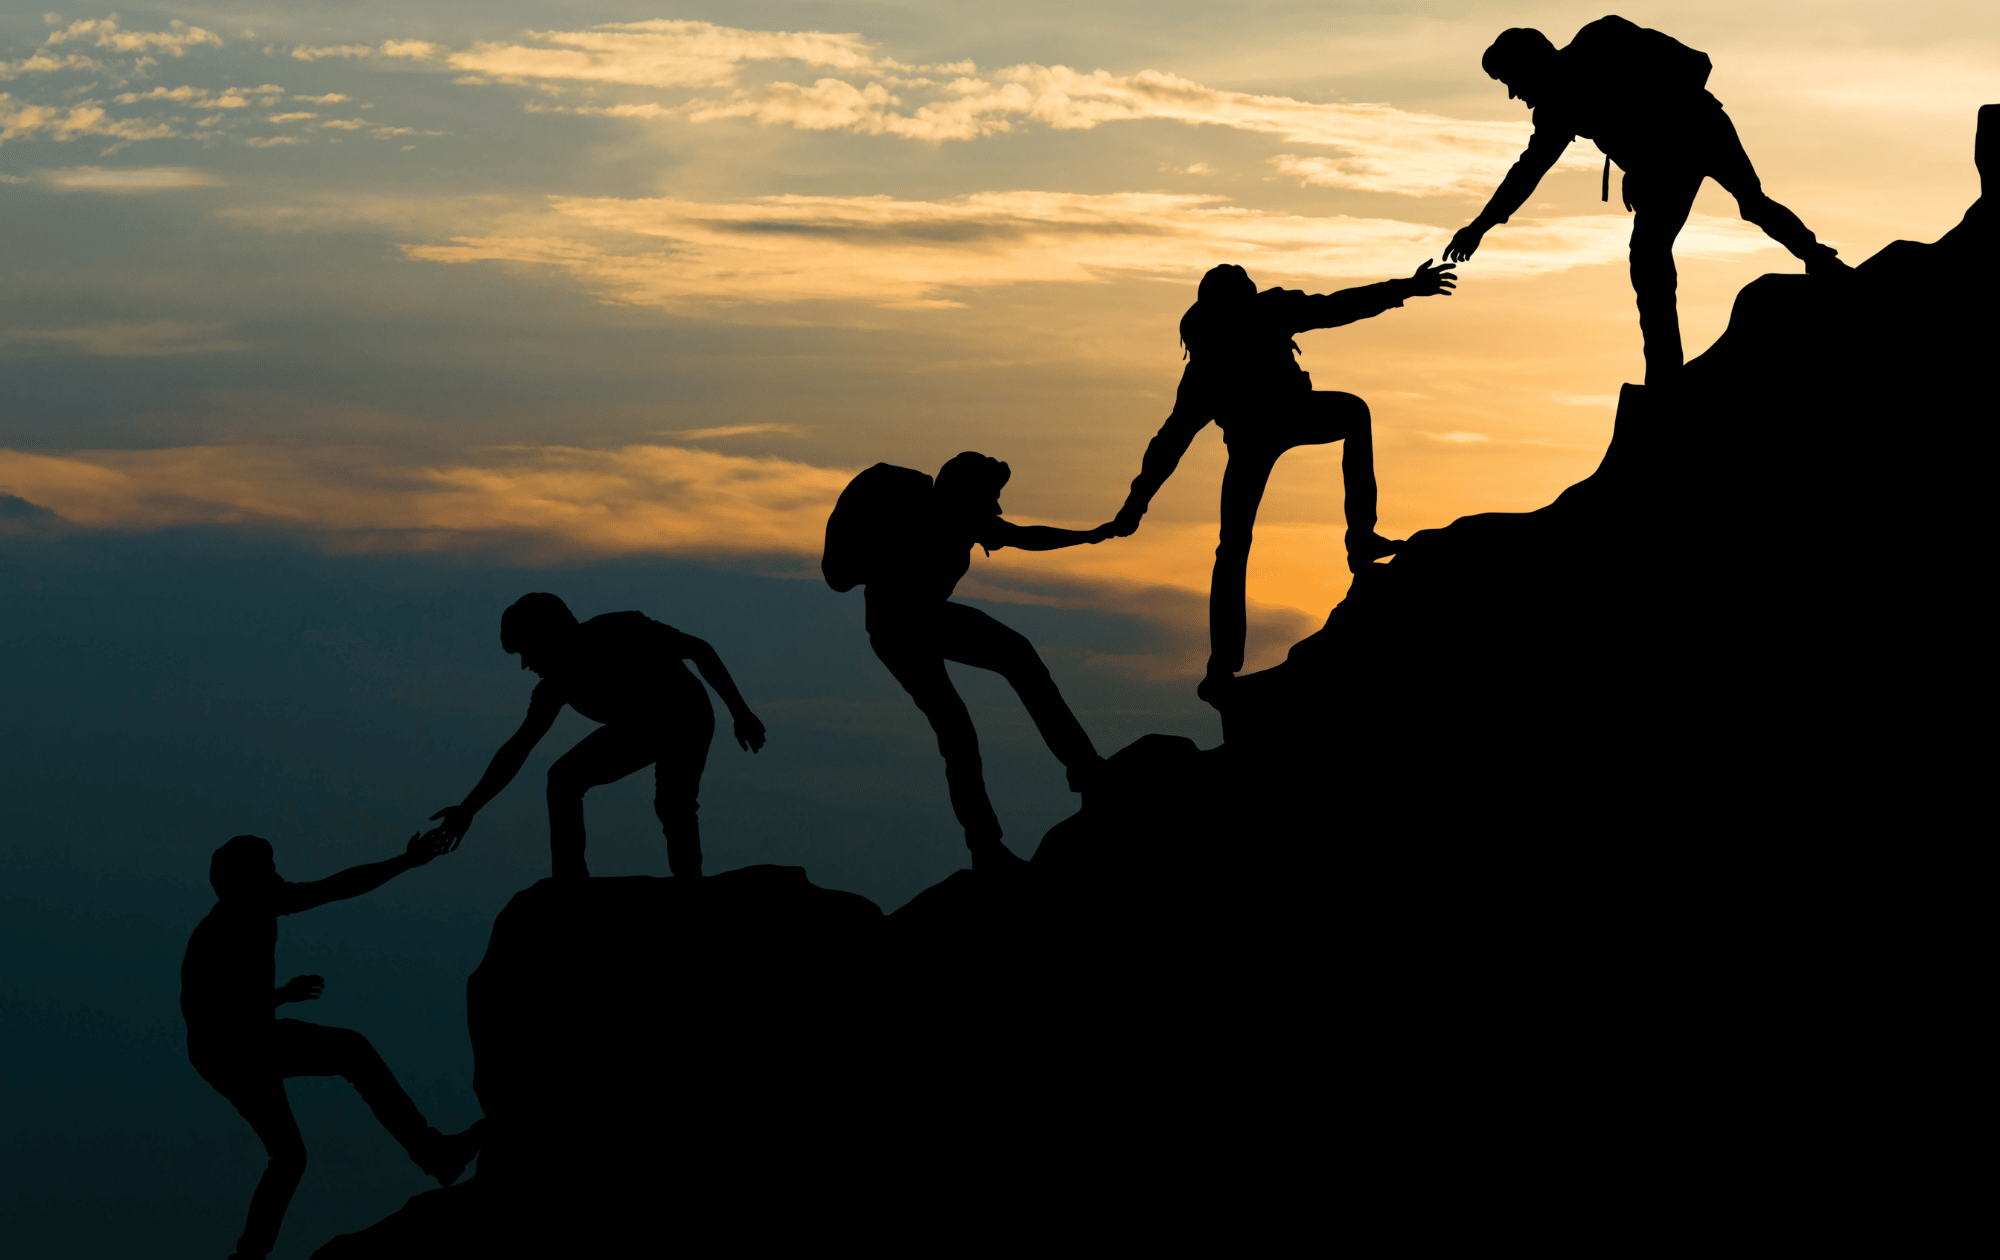 People helping each other climb a steep slope, silhouetted against a
beautiful sky